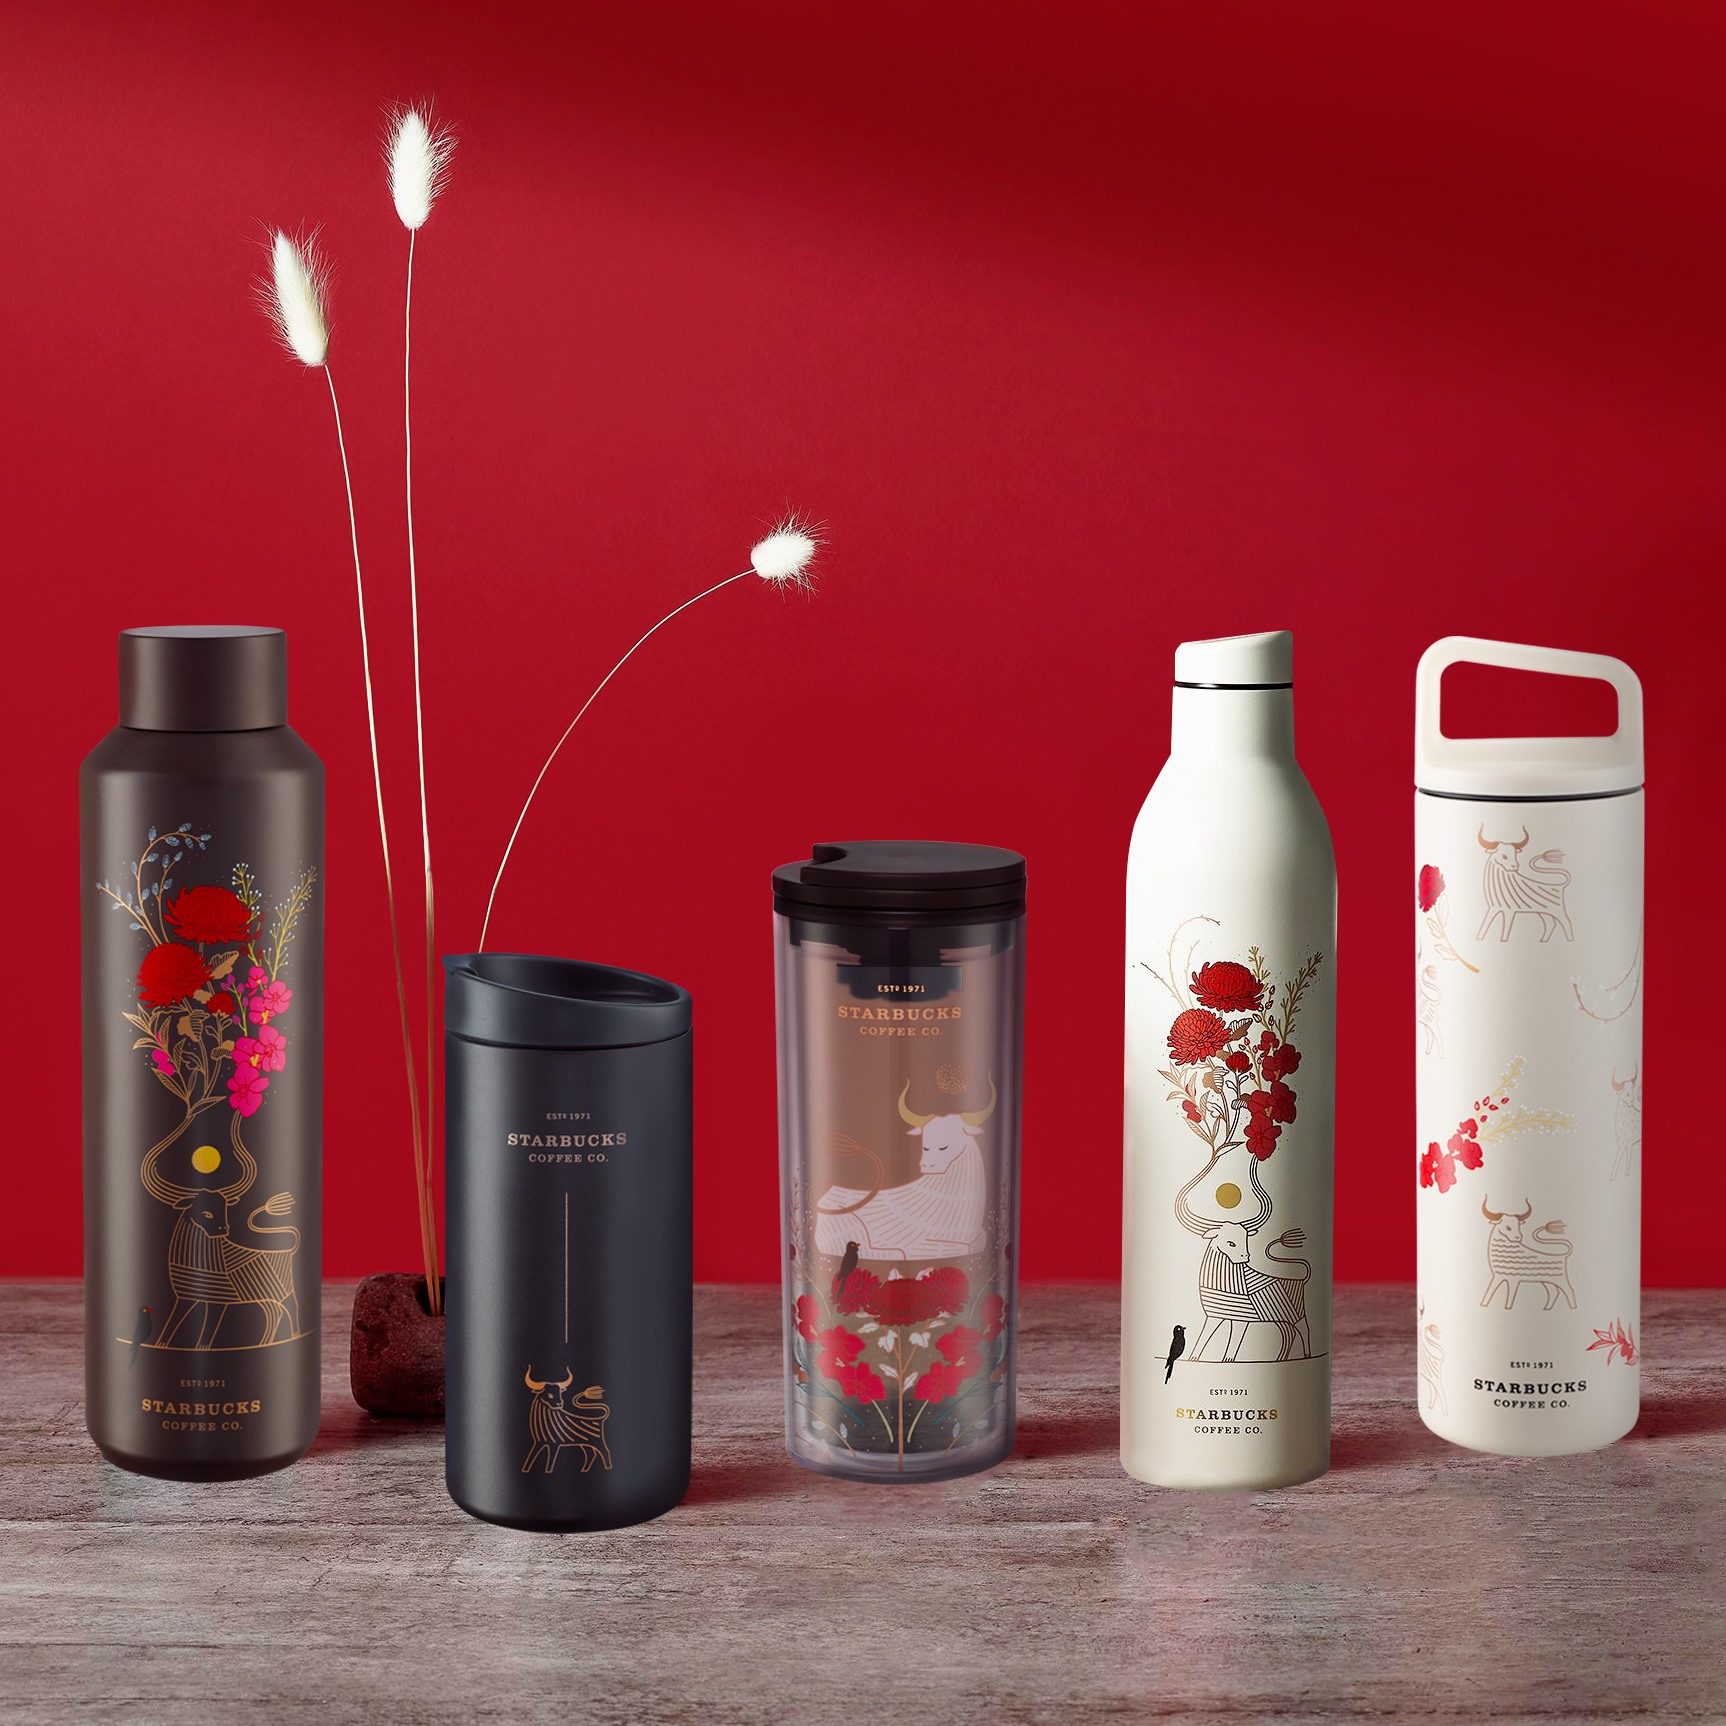 LOOK: Starbucks releases new Year of the Ox merch collection